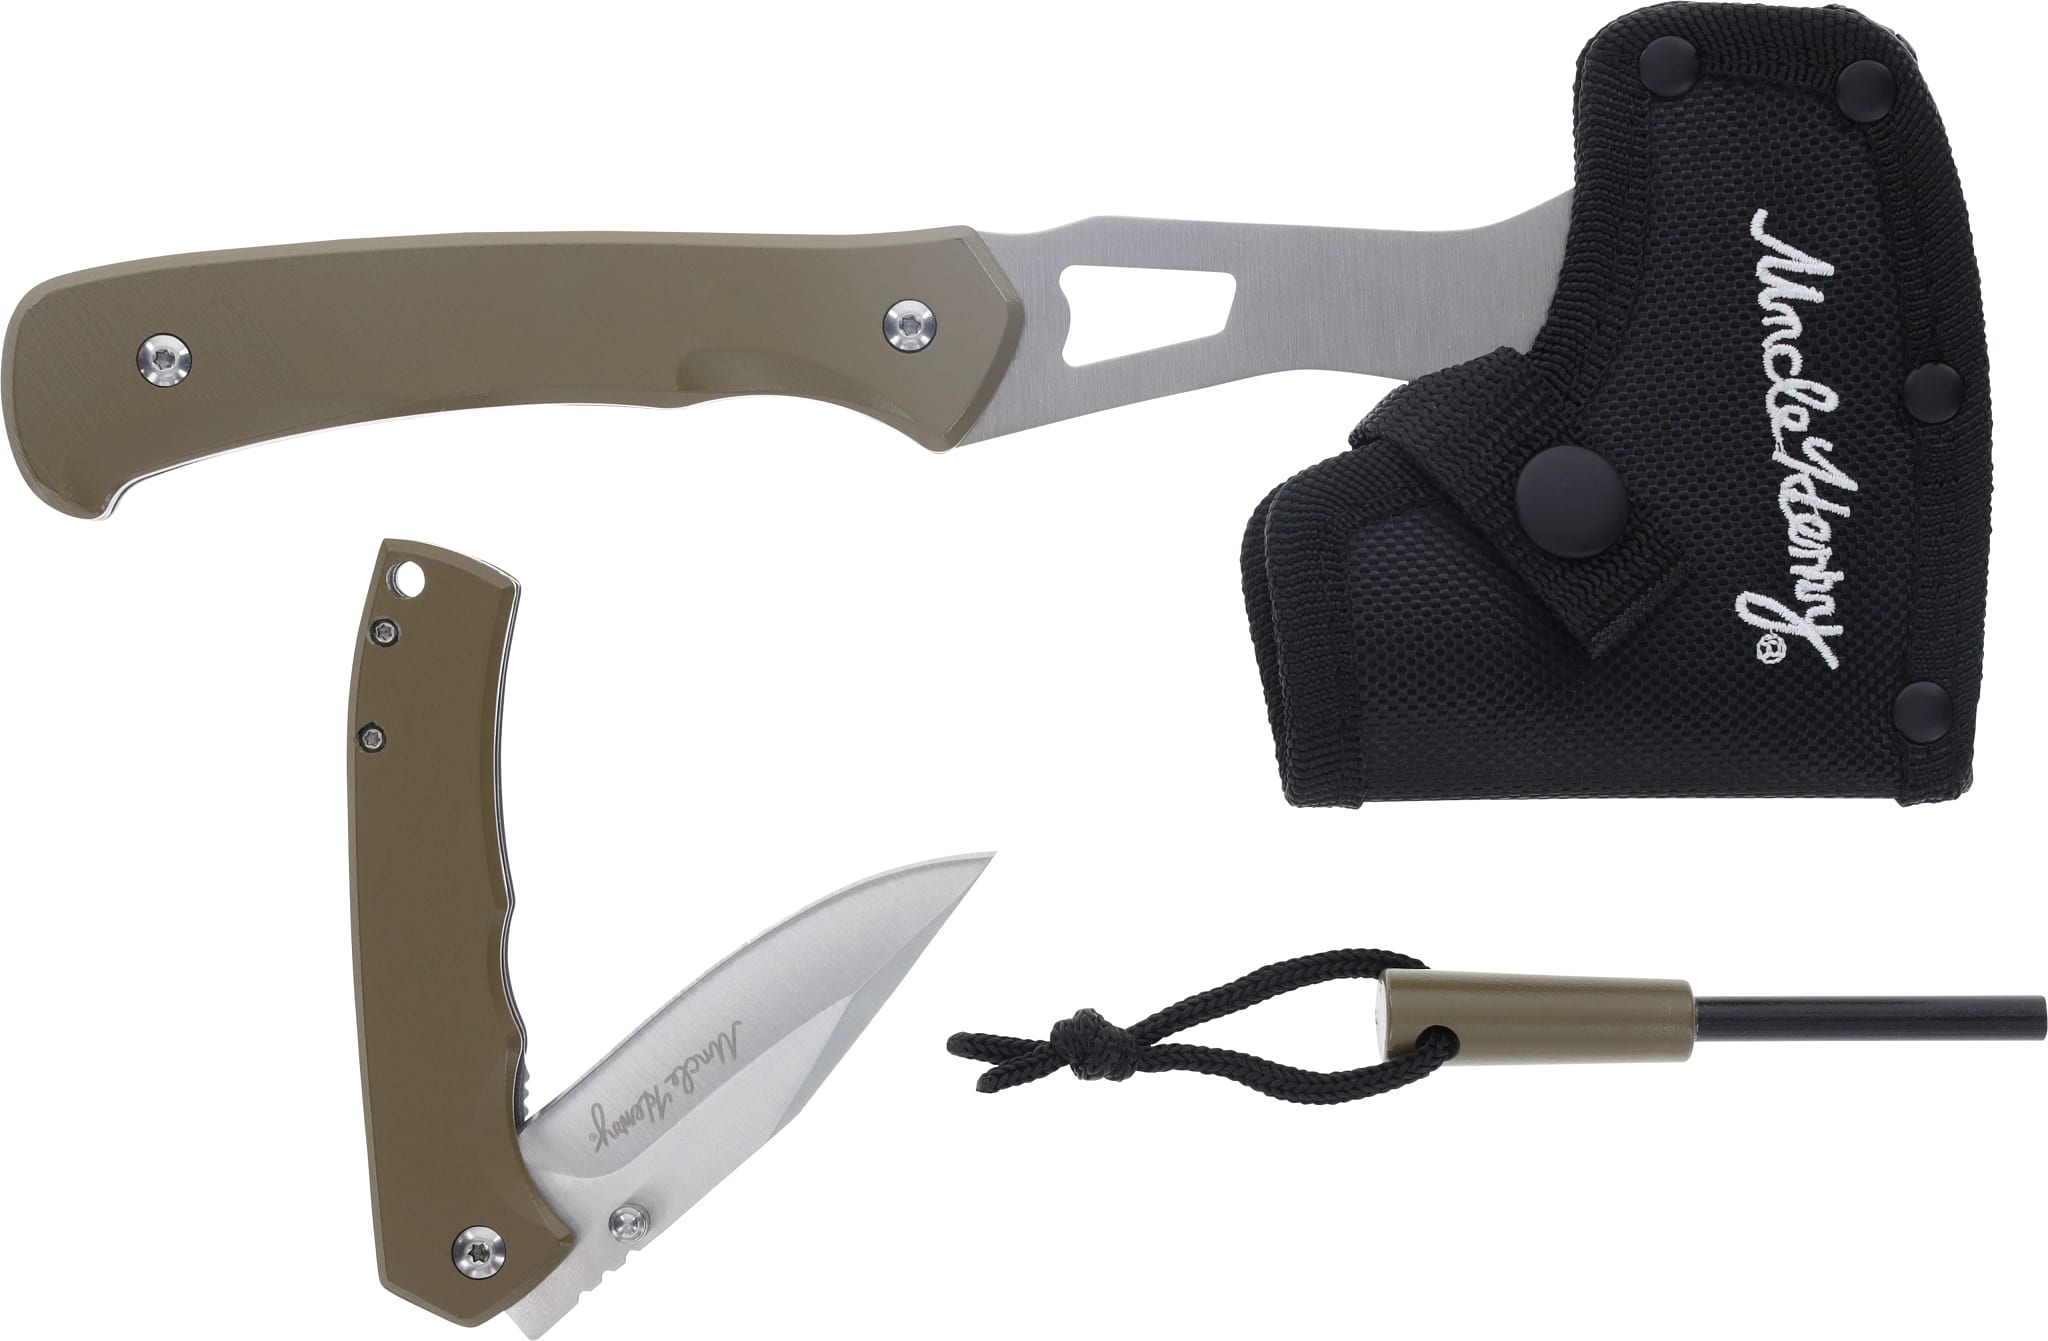 Uncle Henry® 3 Piece Axe and Folding Knife Combo